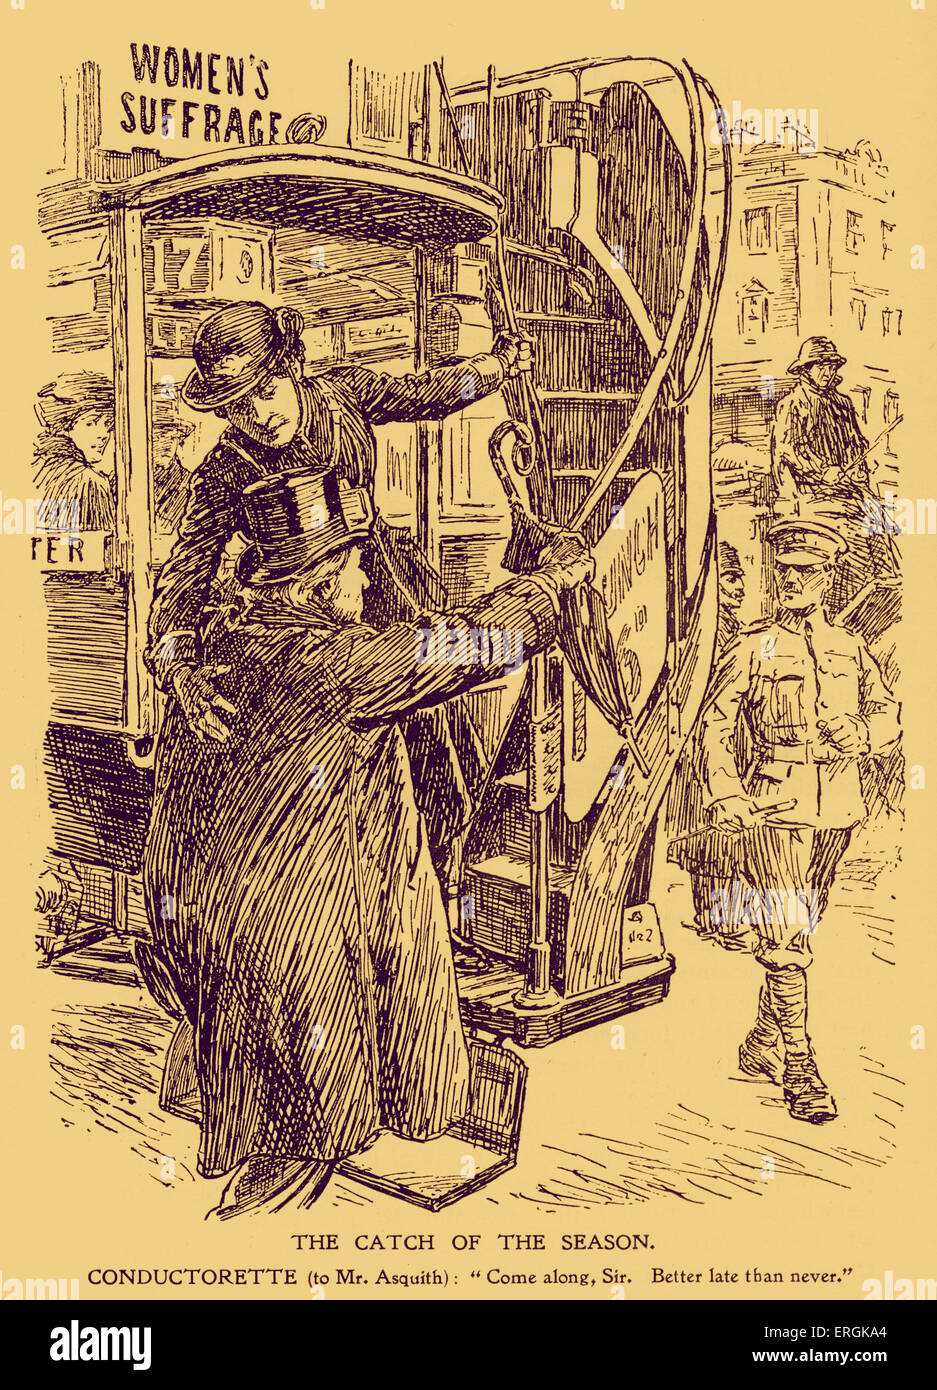 WWI Caricature of a female bus conducto  era helping Lord Asquith onto a bus. Caption reads: 'Conductorette (to Mr. Asquith): Stock Photo